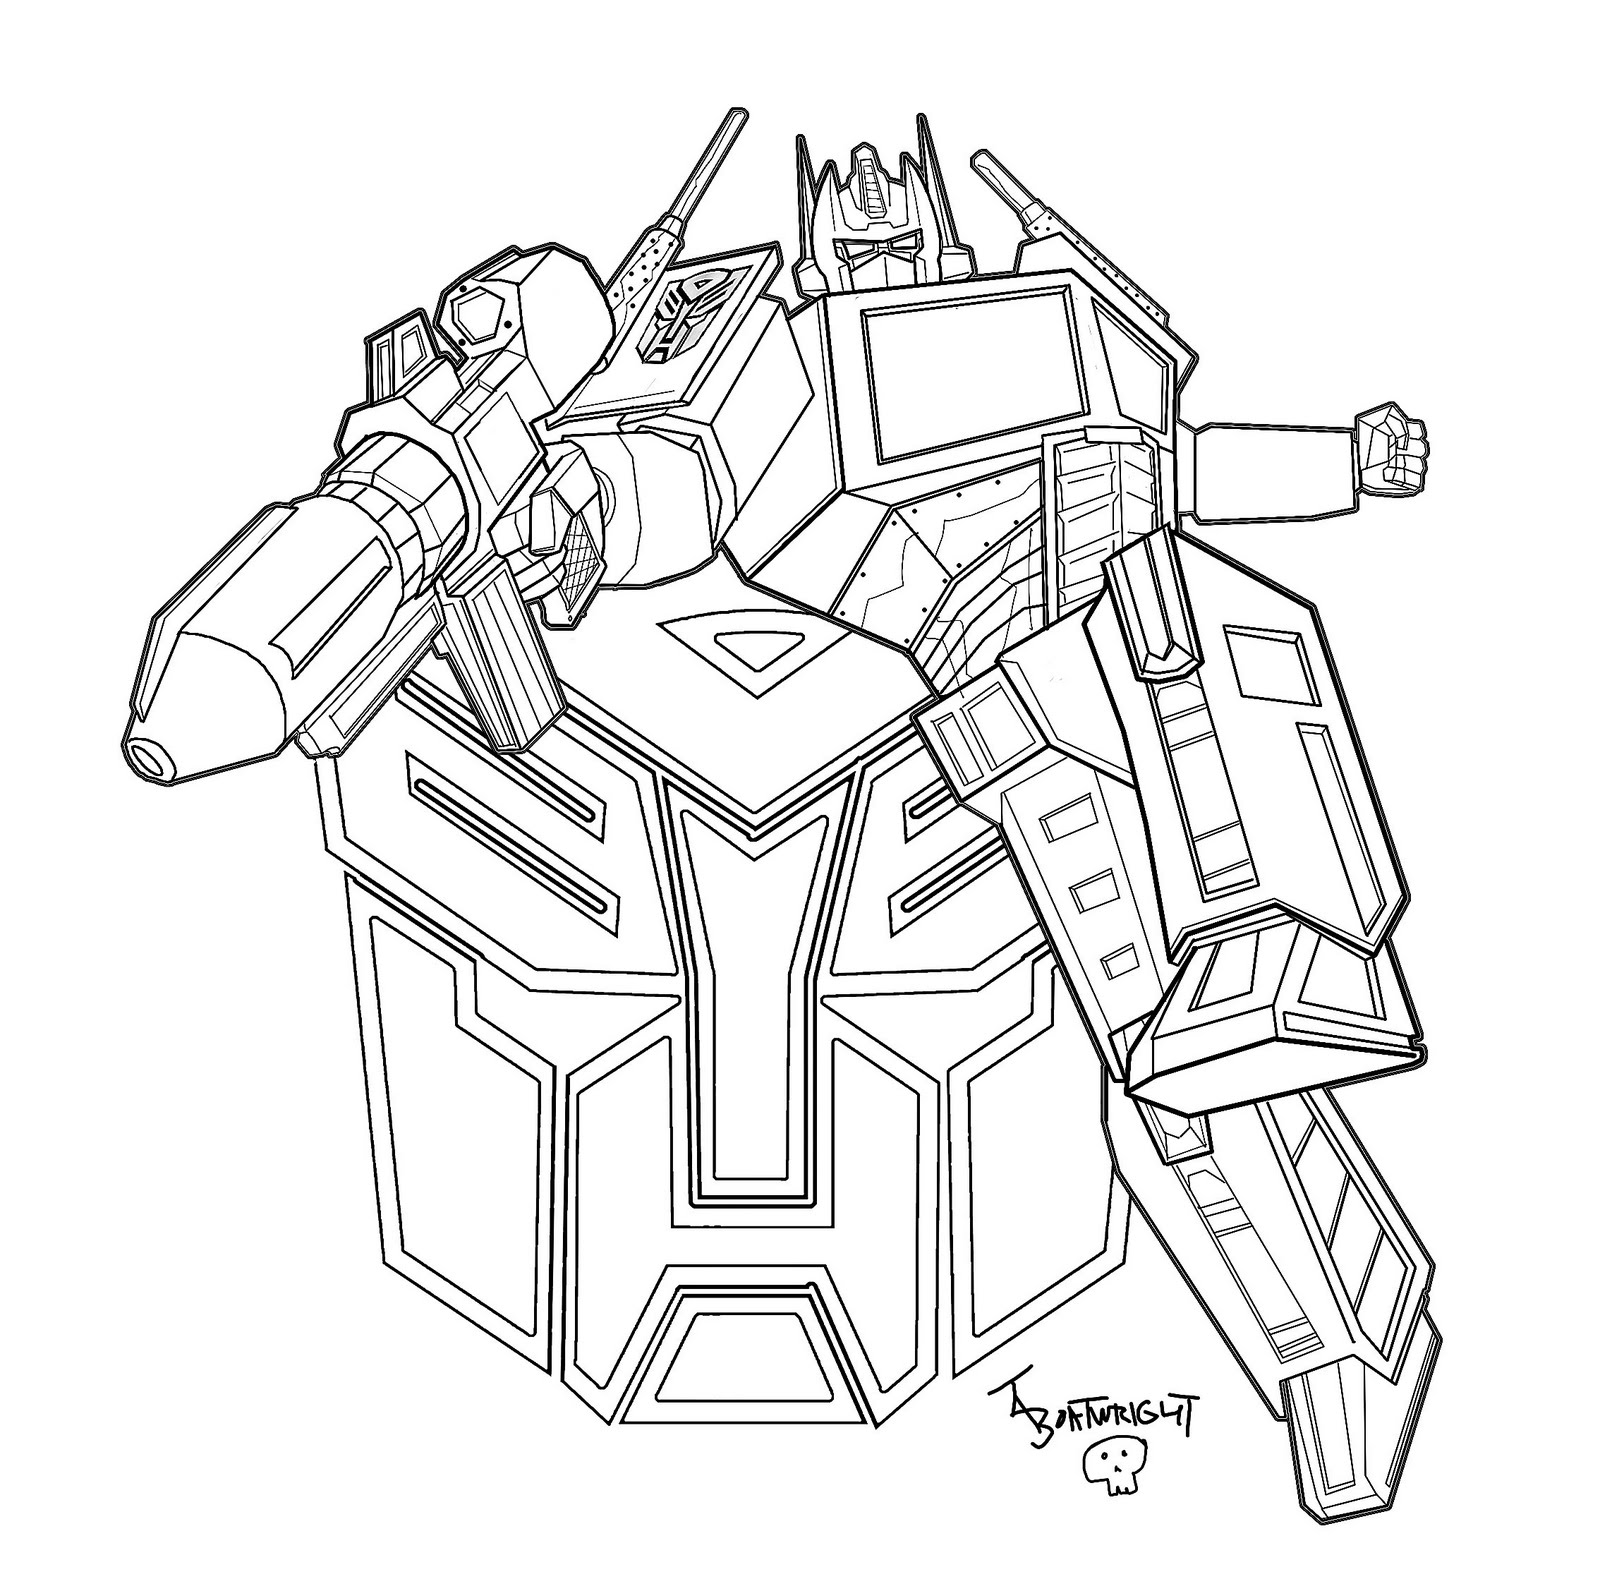  Optimus Prime Transformers Coloring Pages